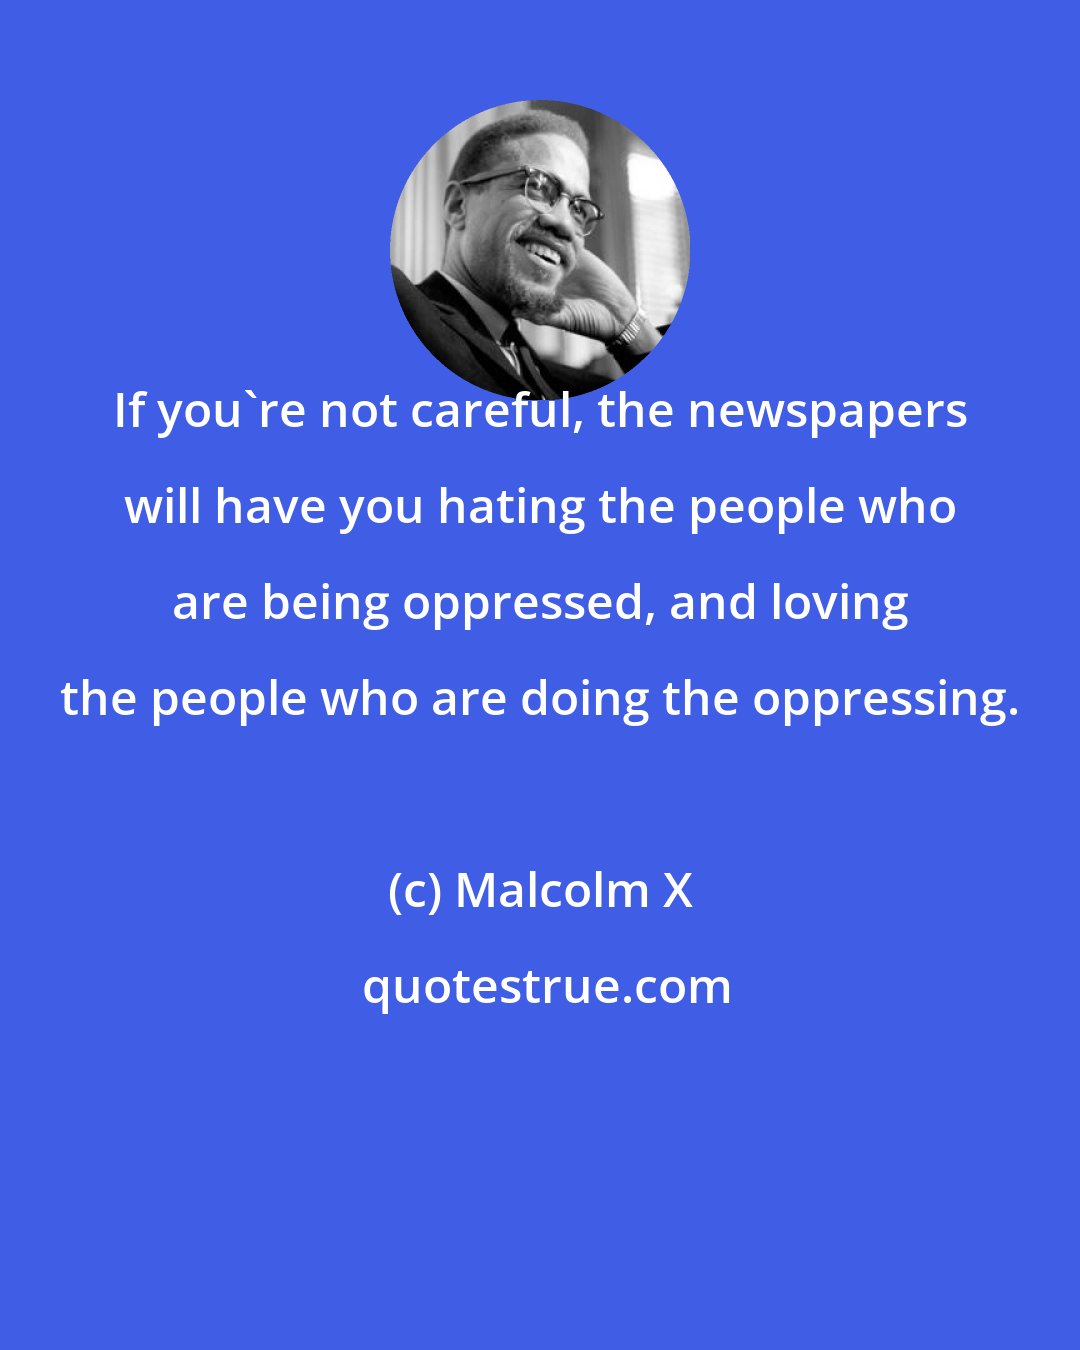 Malcolm X: If you're not careful, the newspapers will have you hating the people who are being oppressed, and loving the people who are doing the oppressing.